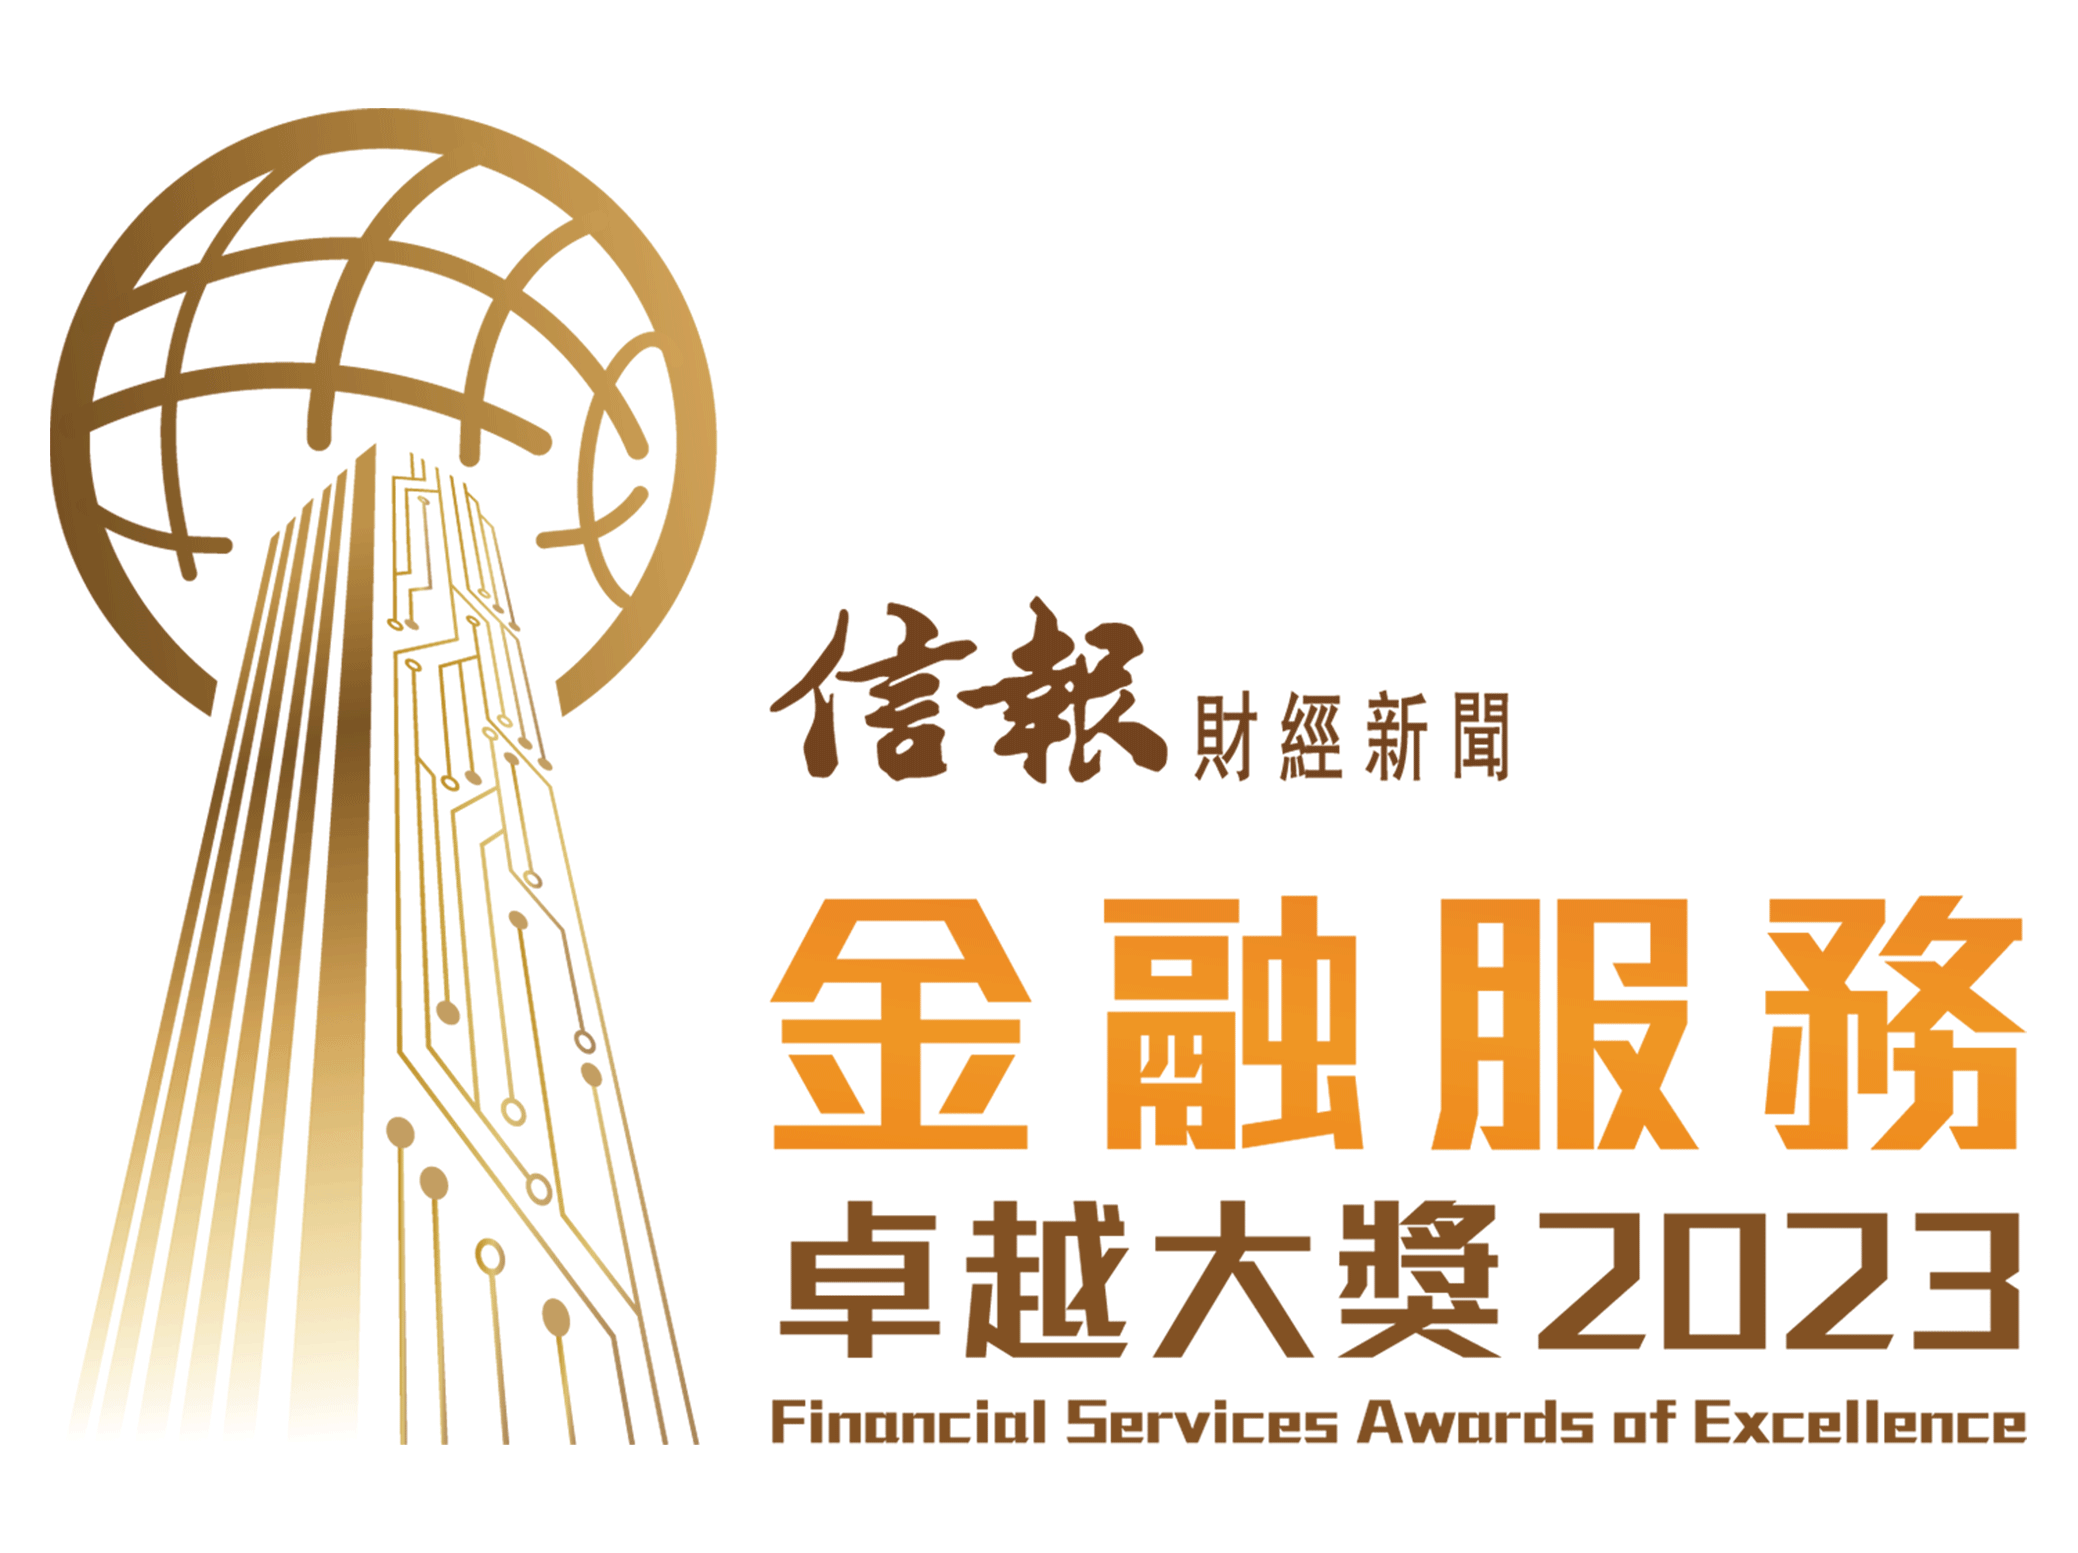 Hong Kong Economic Journal Financial Services Awards of Excellence 2023